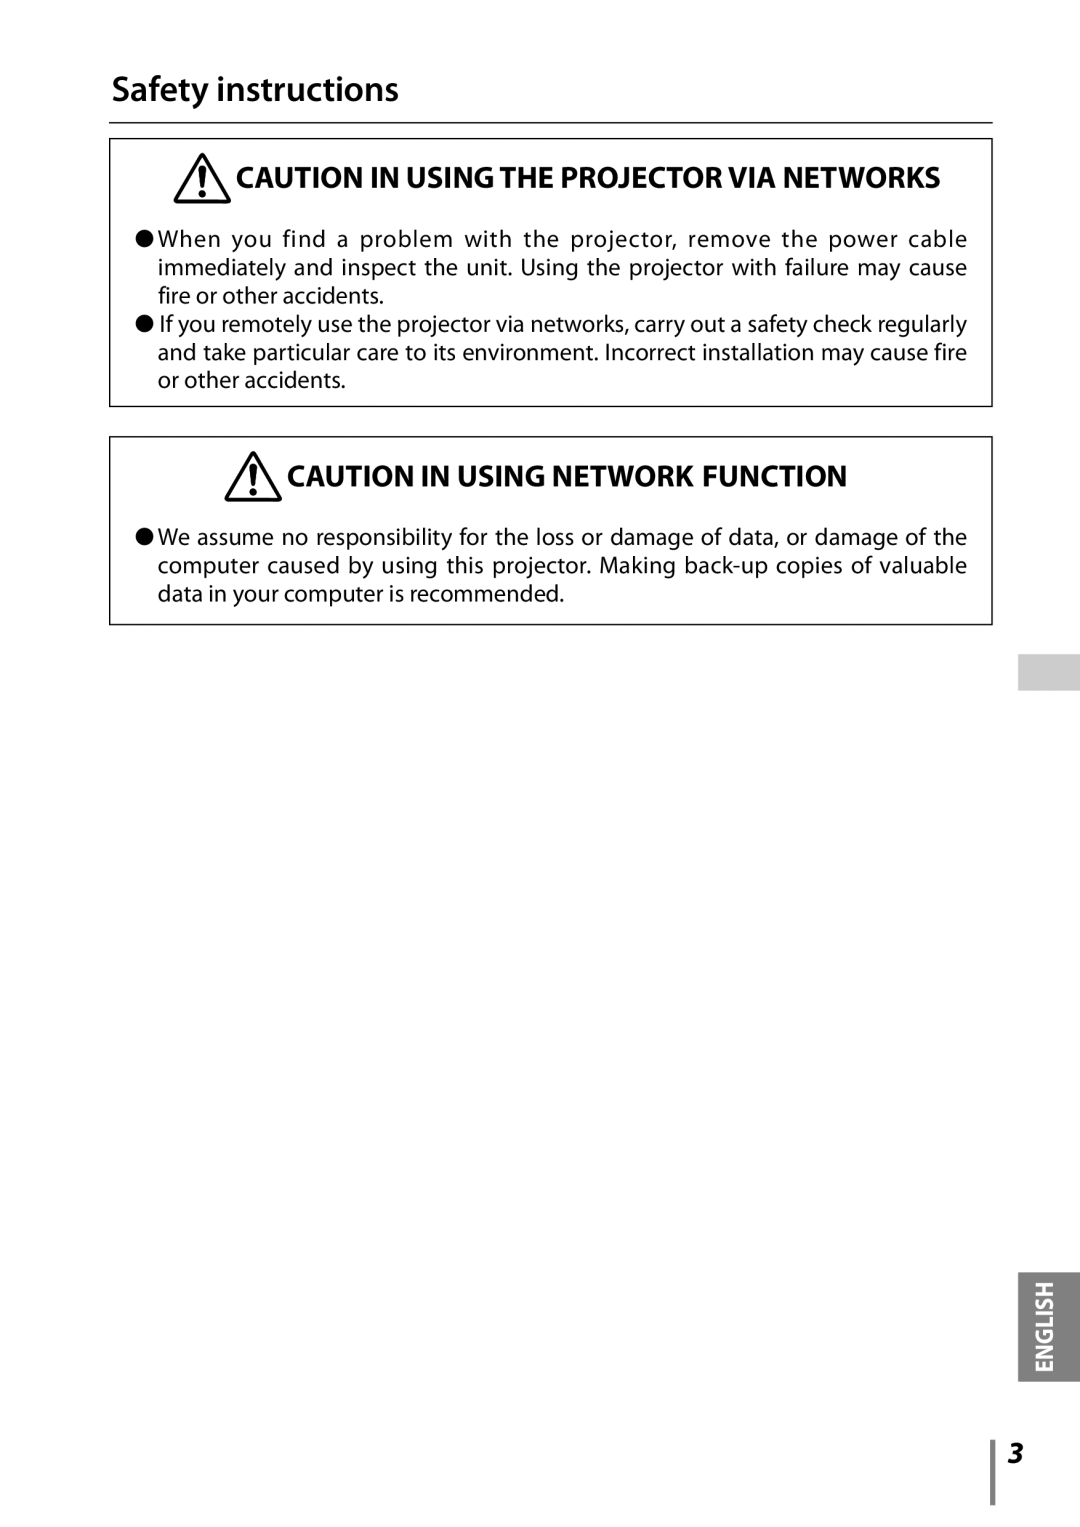 Sanyo owner manual Safety instructions, Caution In Using The Projector Via Networks, Caution In Using Network Function 